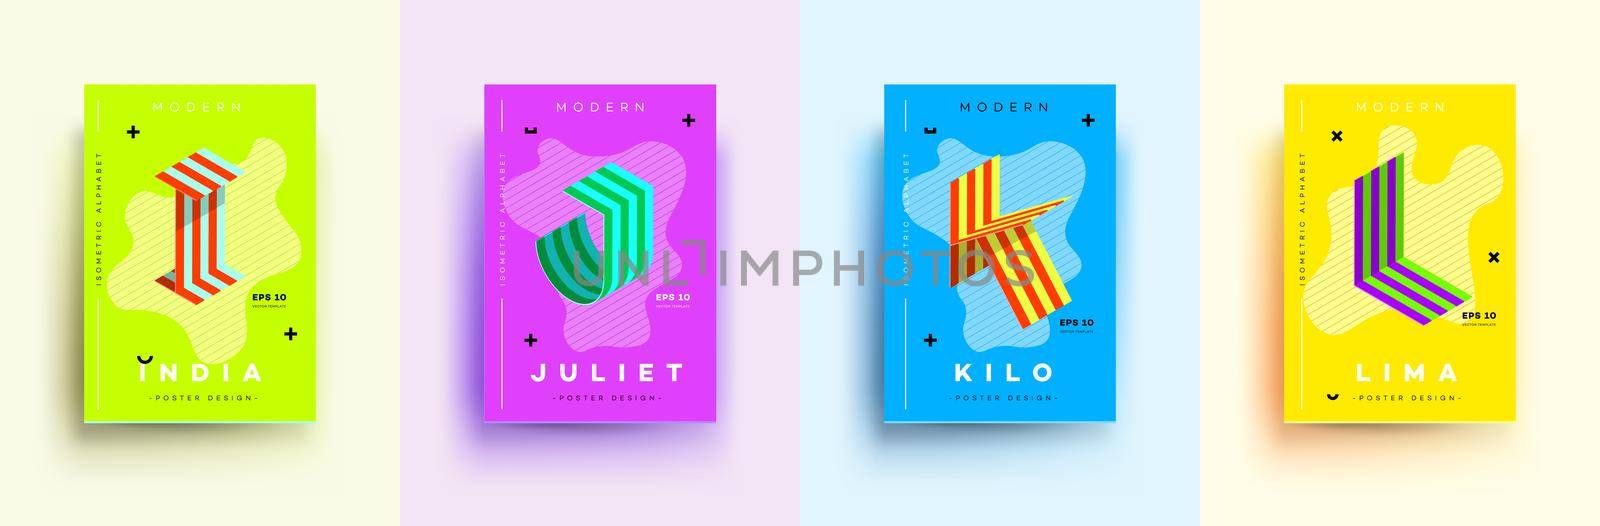 Modern Typographic Colorful Covers. Isometric Letters I, J, K, L With Abstract Memphis Design Background. Vector Trendy Template For Your Posters, Banners, Presentations, Layouts.